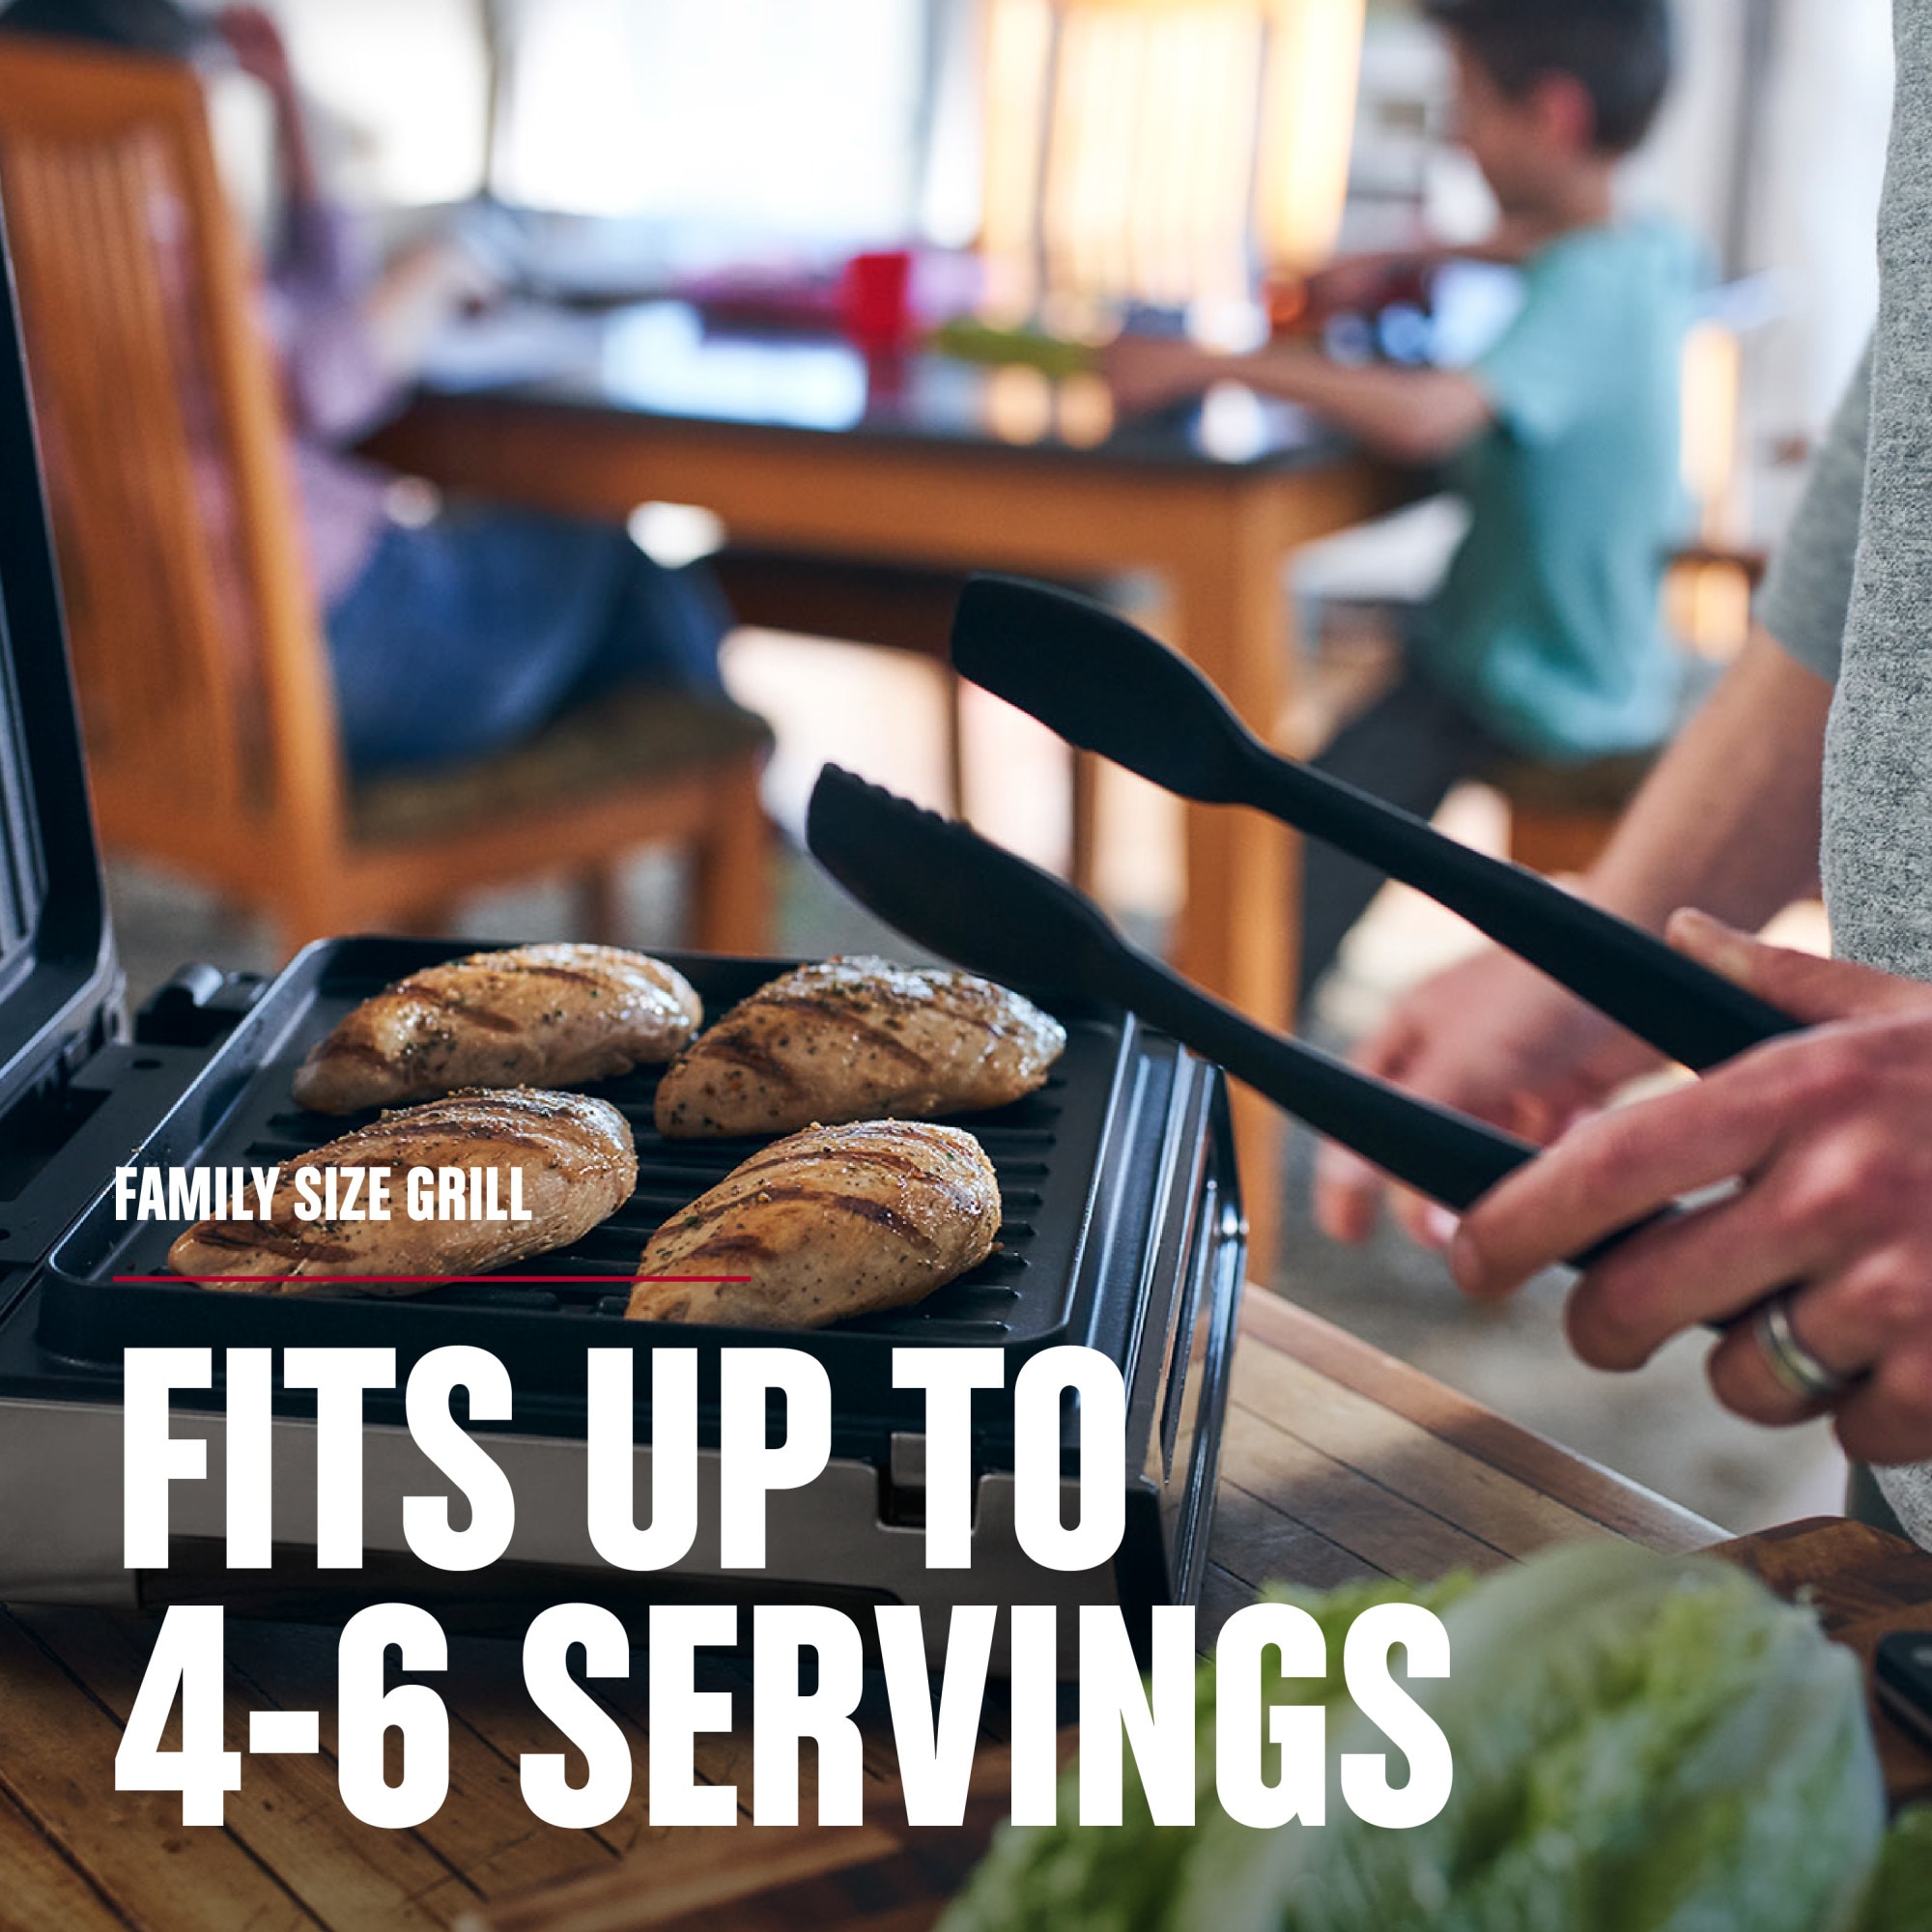  George Foreman Contact Smokeless Select a Temp. Grill, Family  Size (4-6 Servings): Home & Kitchen